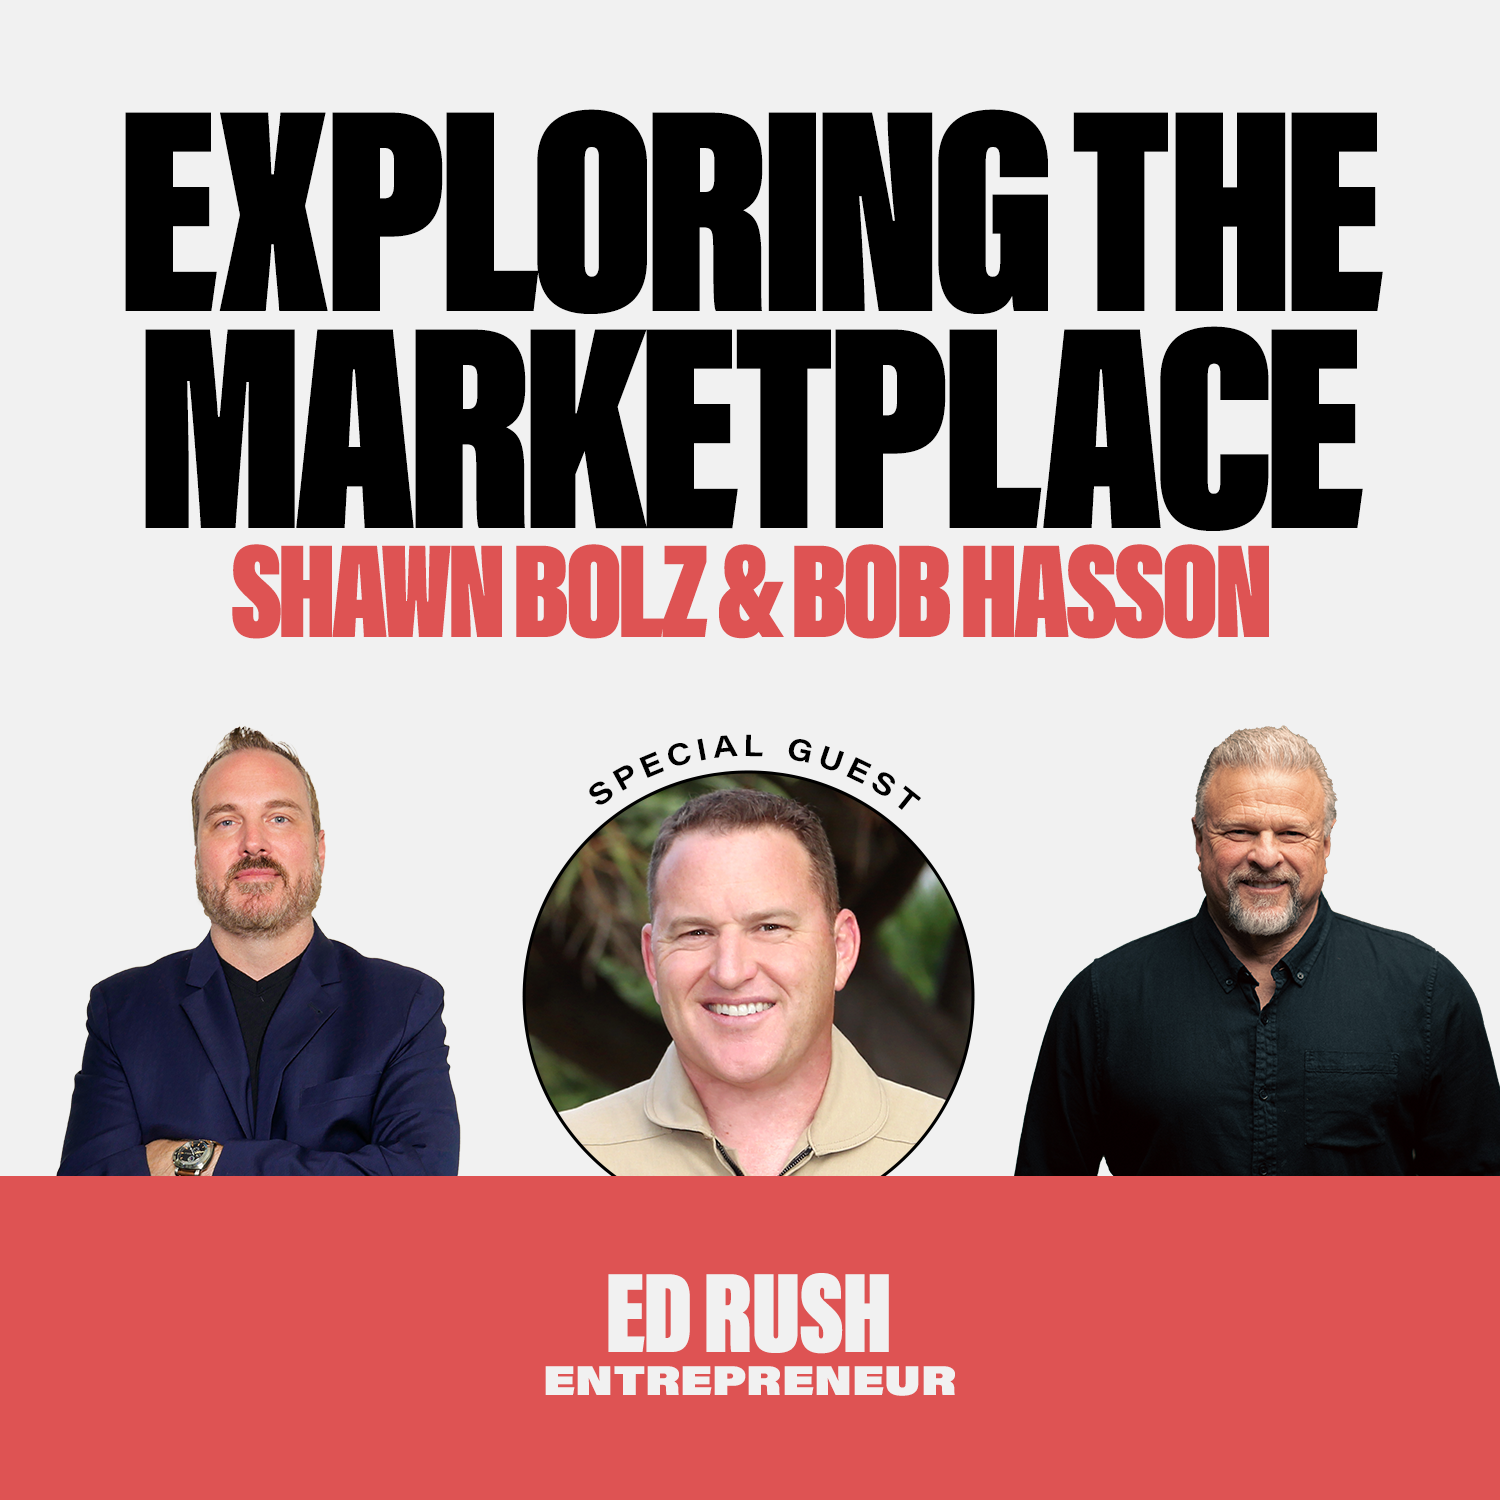 Real Life Top Gun Shares How to Hear From God About Your Business with Ed Rush (S:3 - Ep 23)